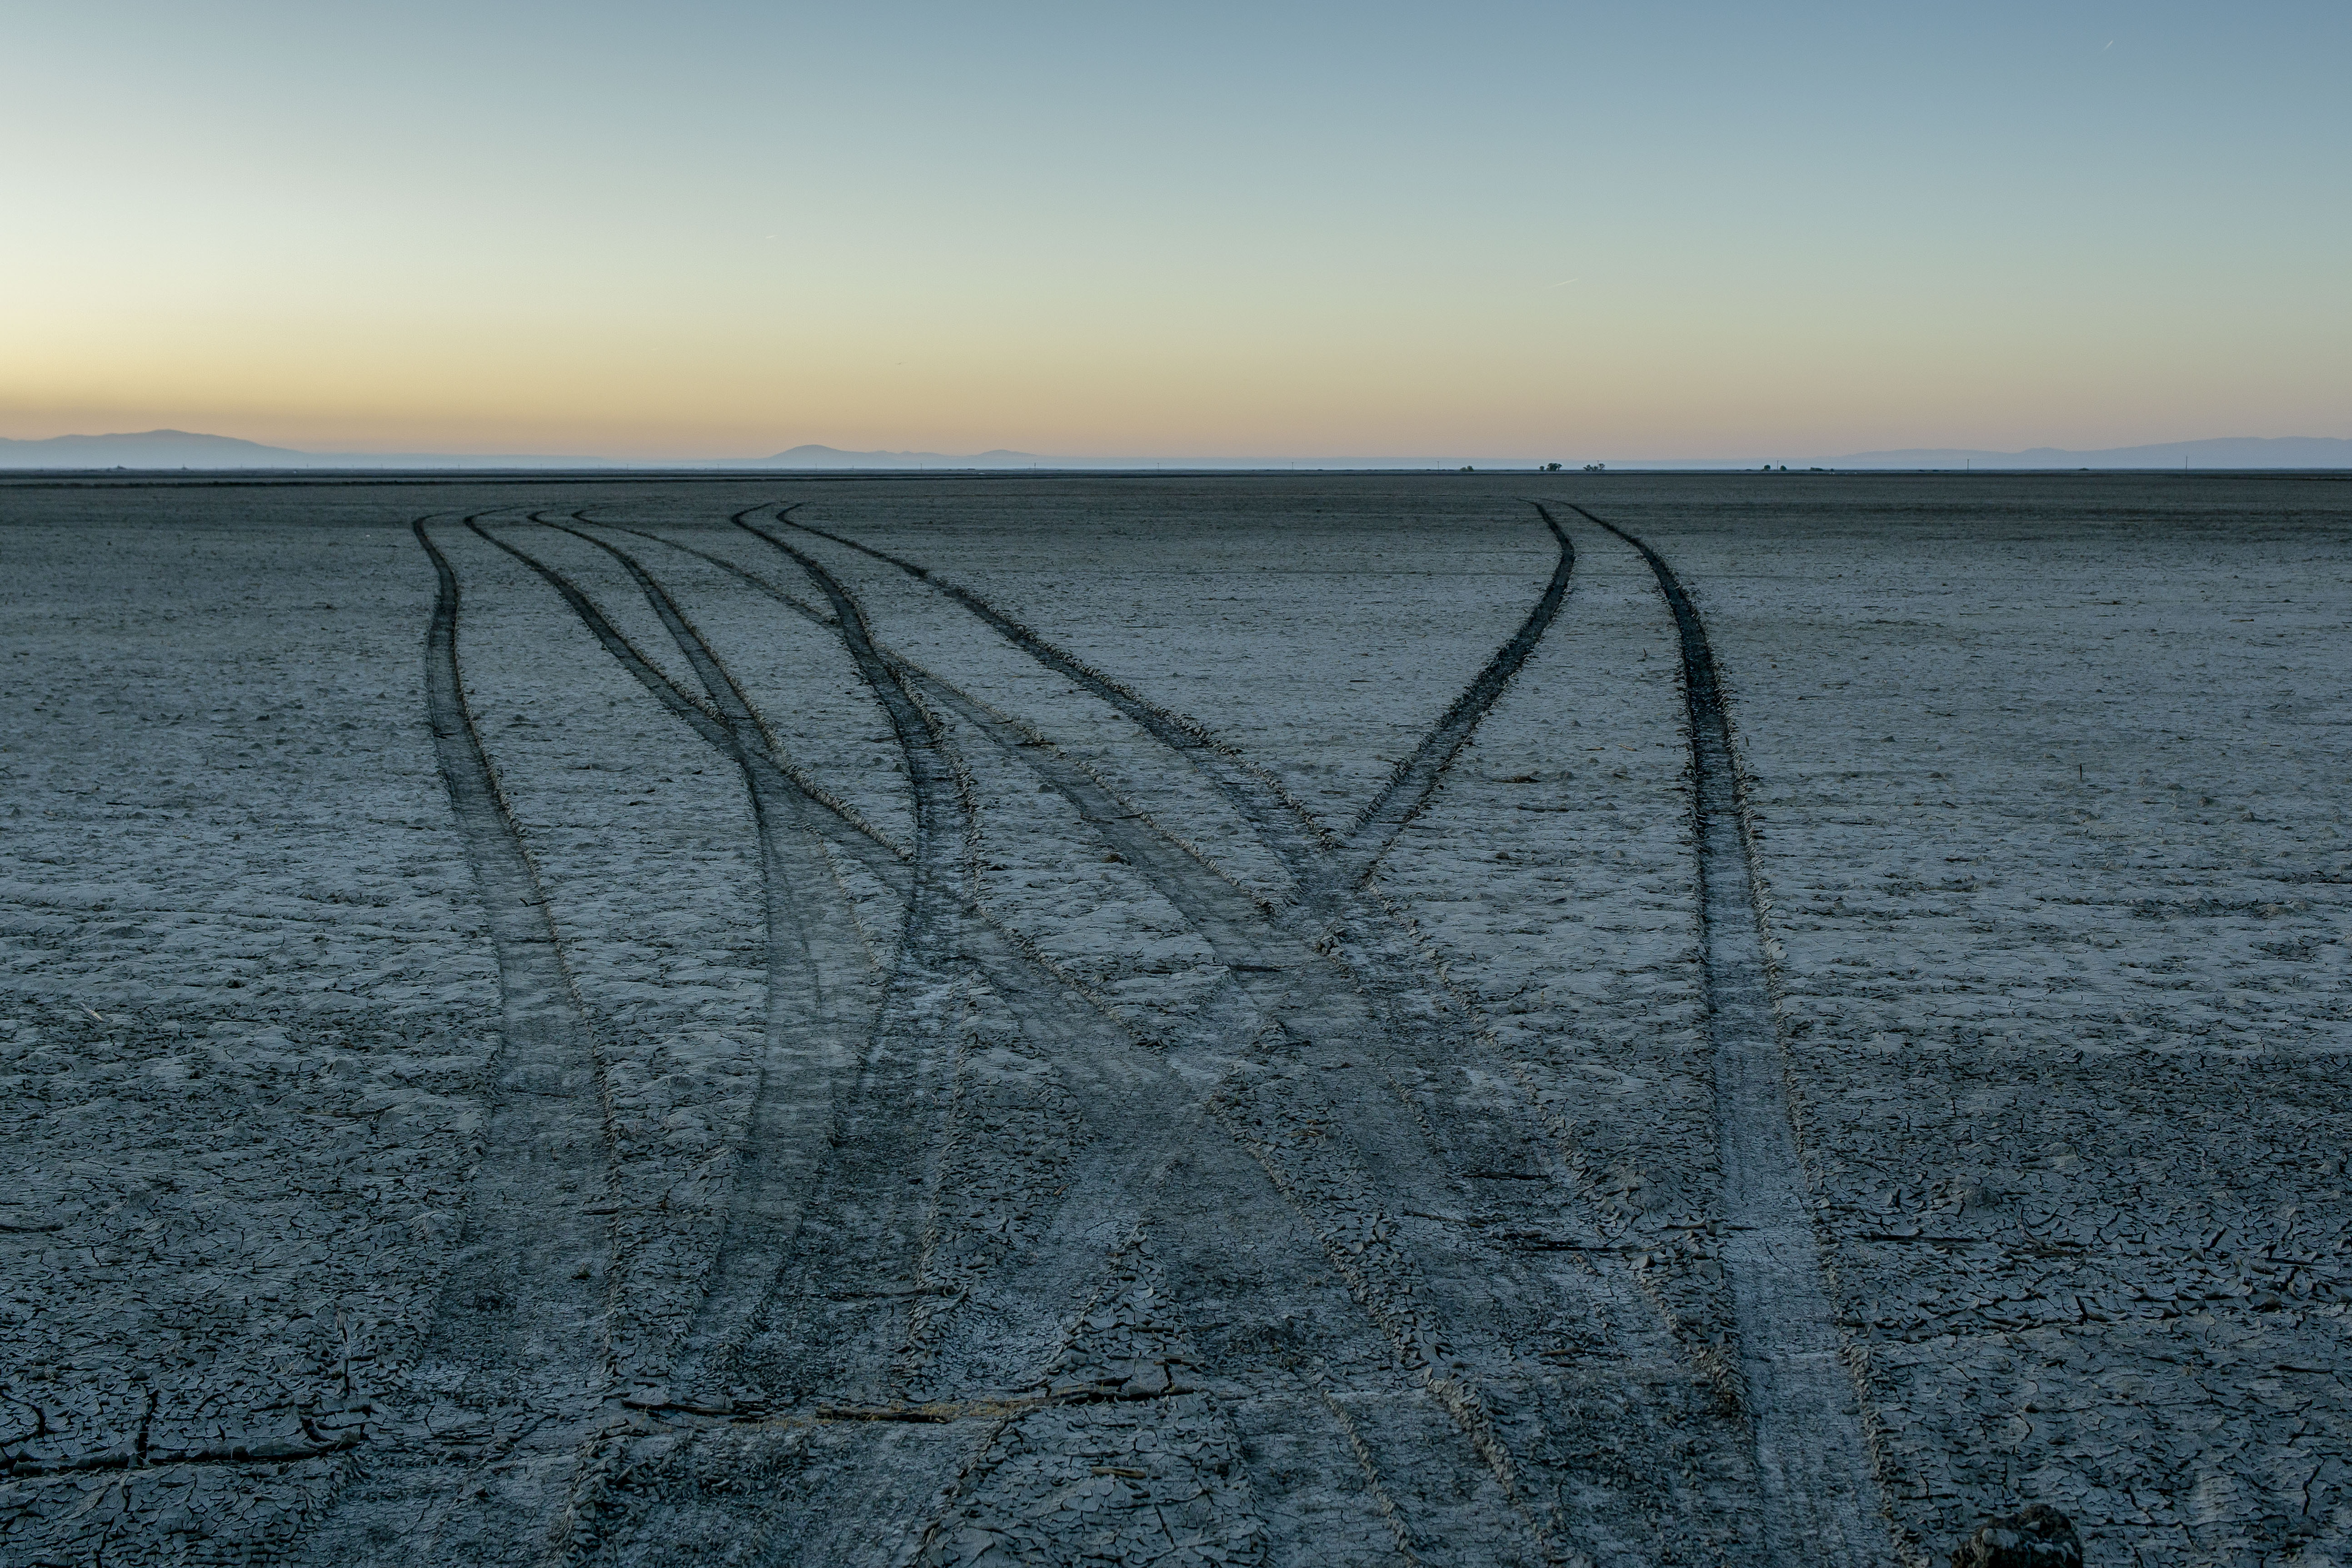 A photograph of an empty lake bed with tire tracks running through the sand.